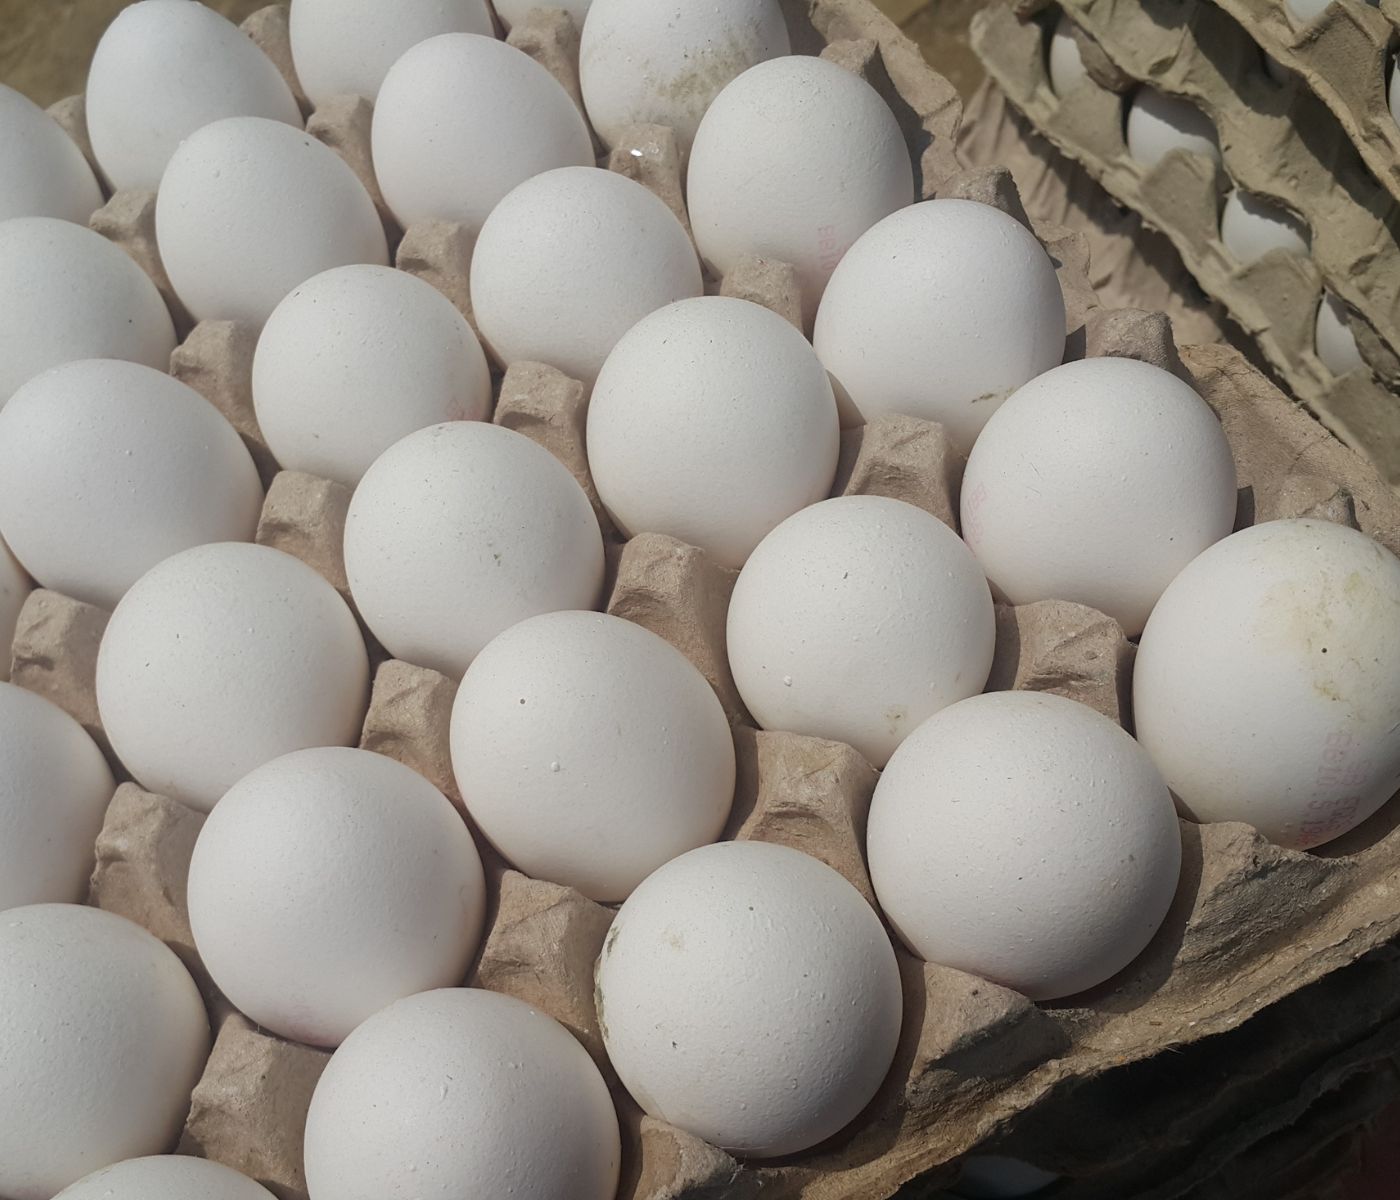 Russia suffers increases in egg prices